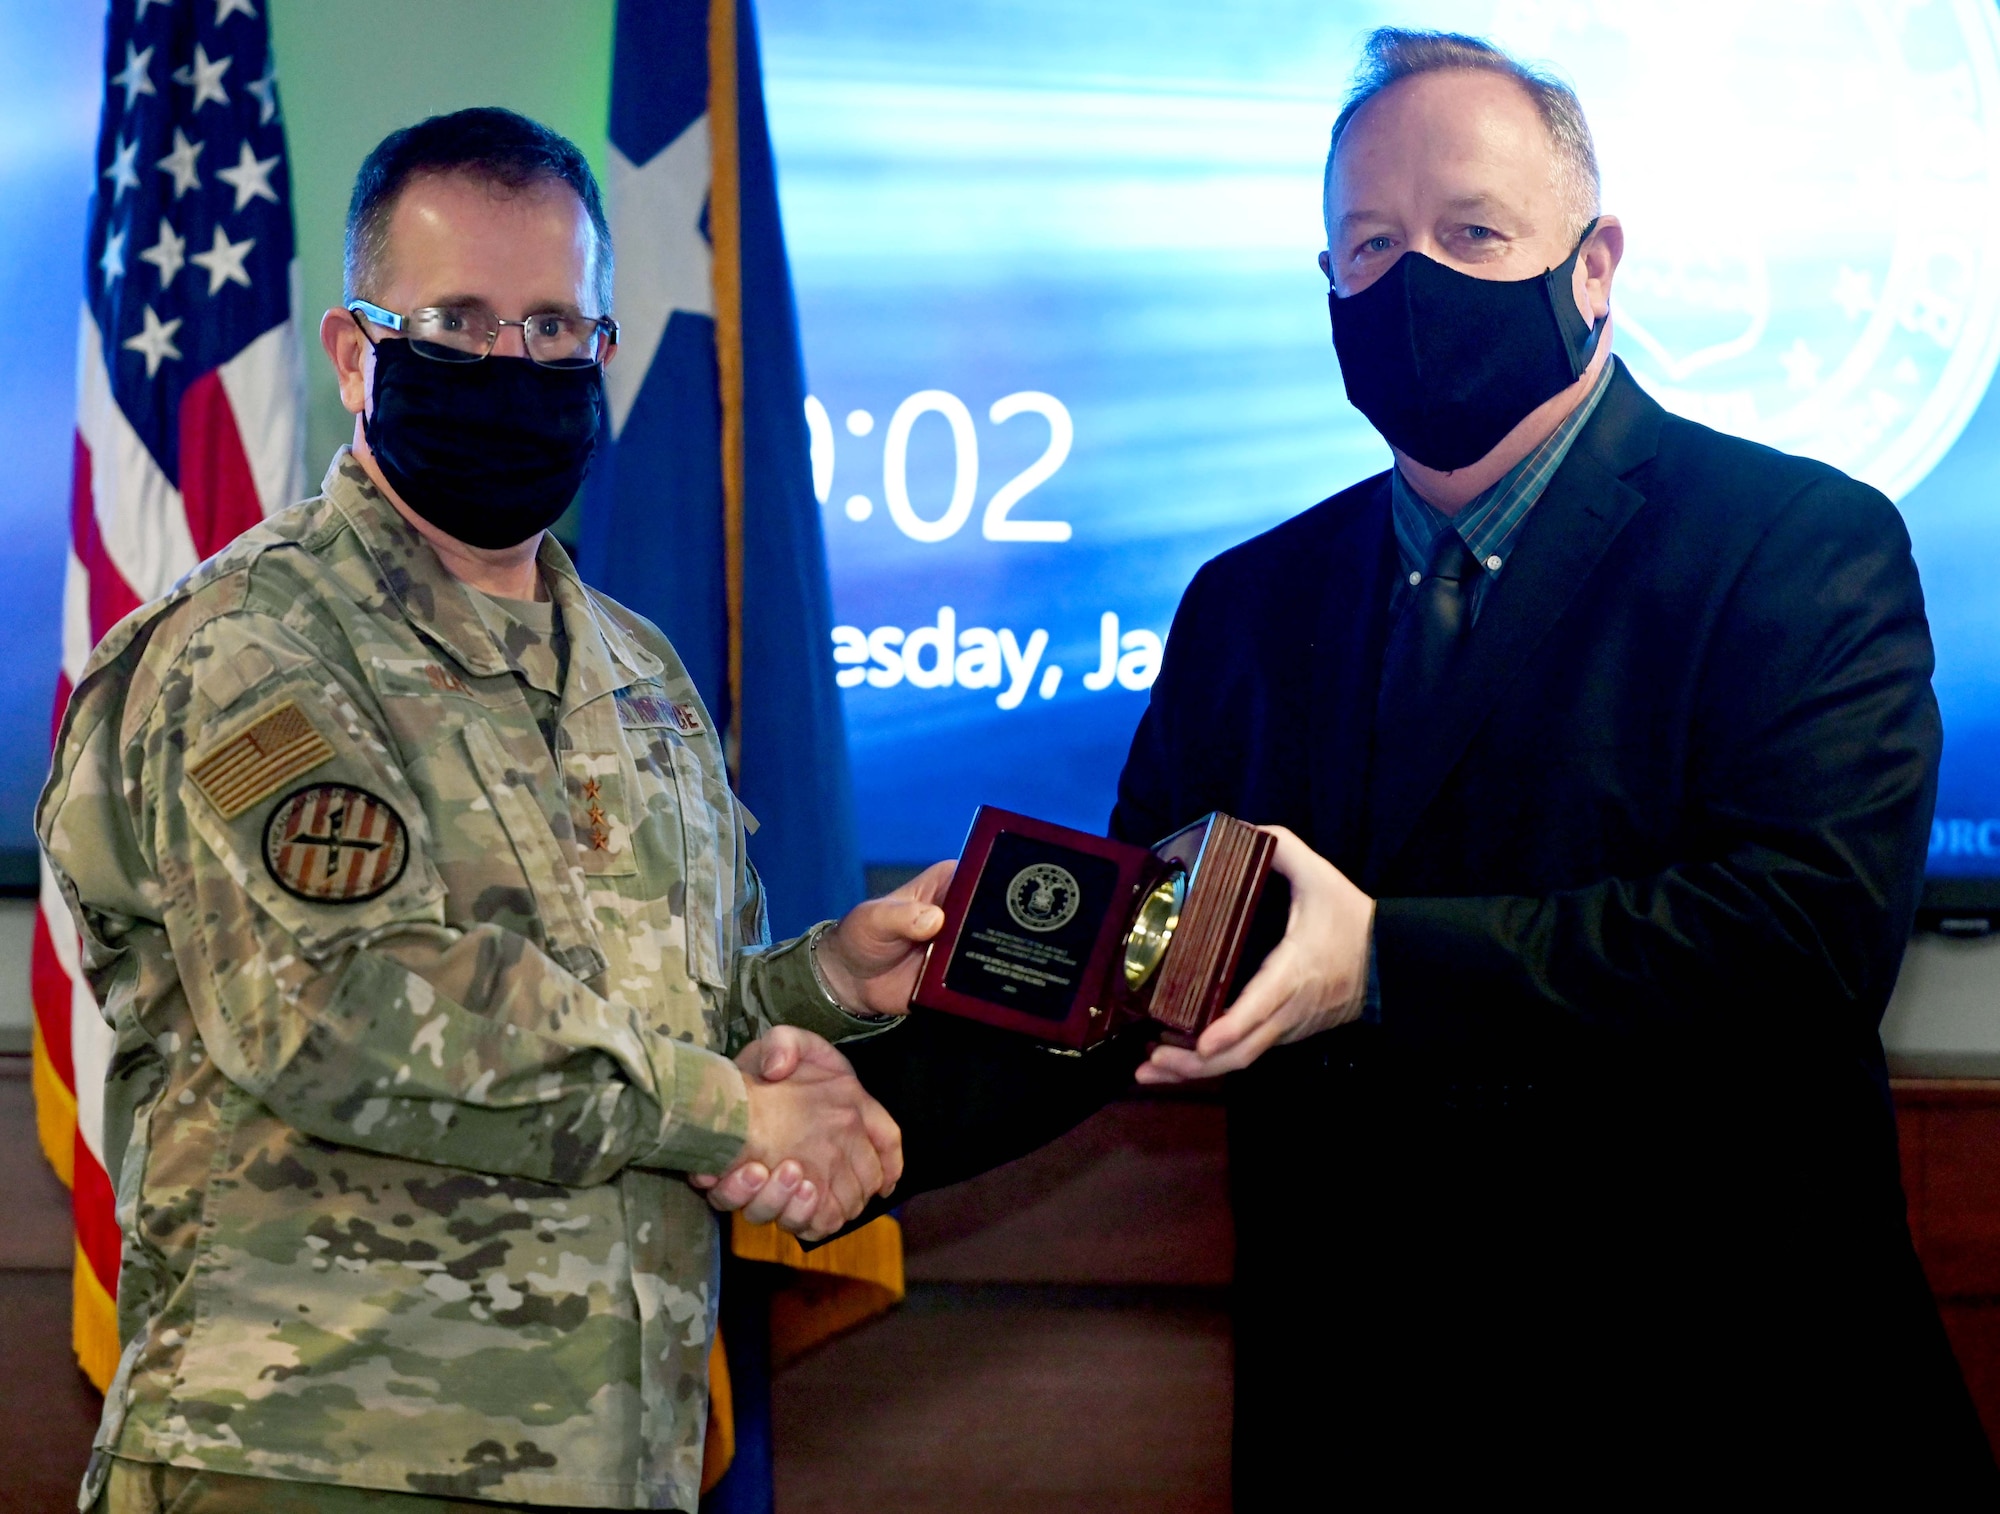 Lt. Gen. Jim Slife, commander of Air Force Special Operations Command, presents the Department of the Air Force’s Excellence in Command History Program Management Award to Eric Witt, AFSOC deputy command historian, at Hurlburt Field, Fla., Jan. 4, 2022. The AFSOC History Office was recognized as the best primary or field command history office for outstanding history and heritage programs leadership that provided exemplary historical services to improve organizational effectiveness, esprit de corps, and combat capability. (U.S. Air Force photo by Staff Sgt. Brandon Esau)